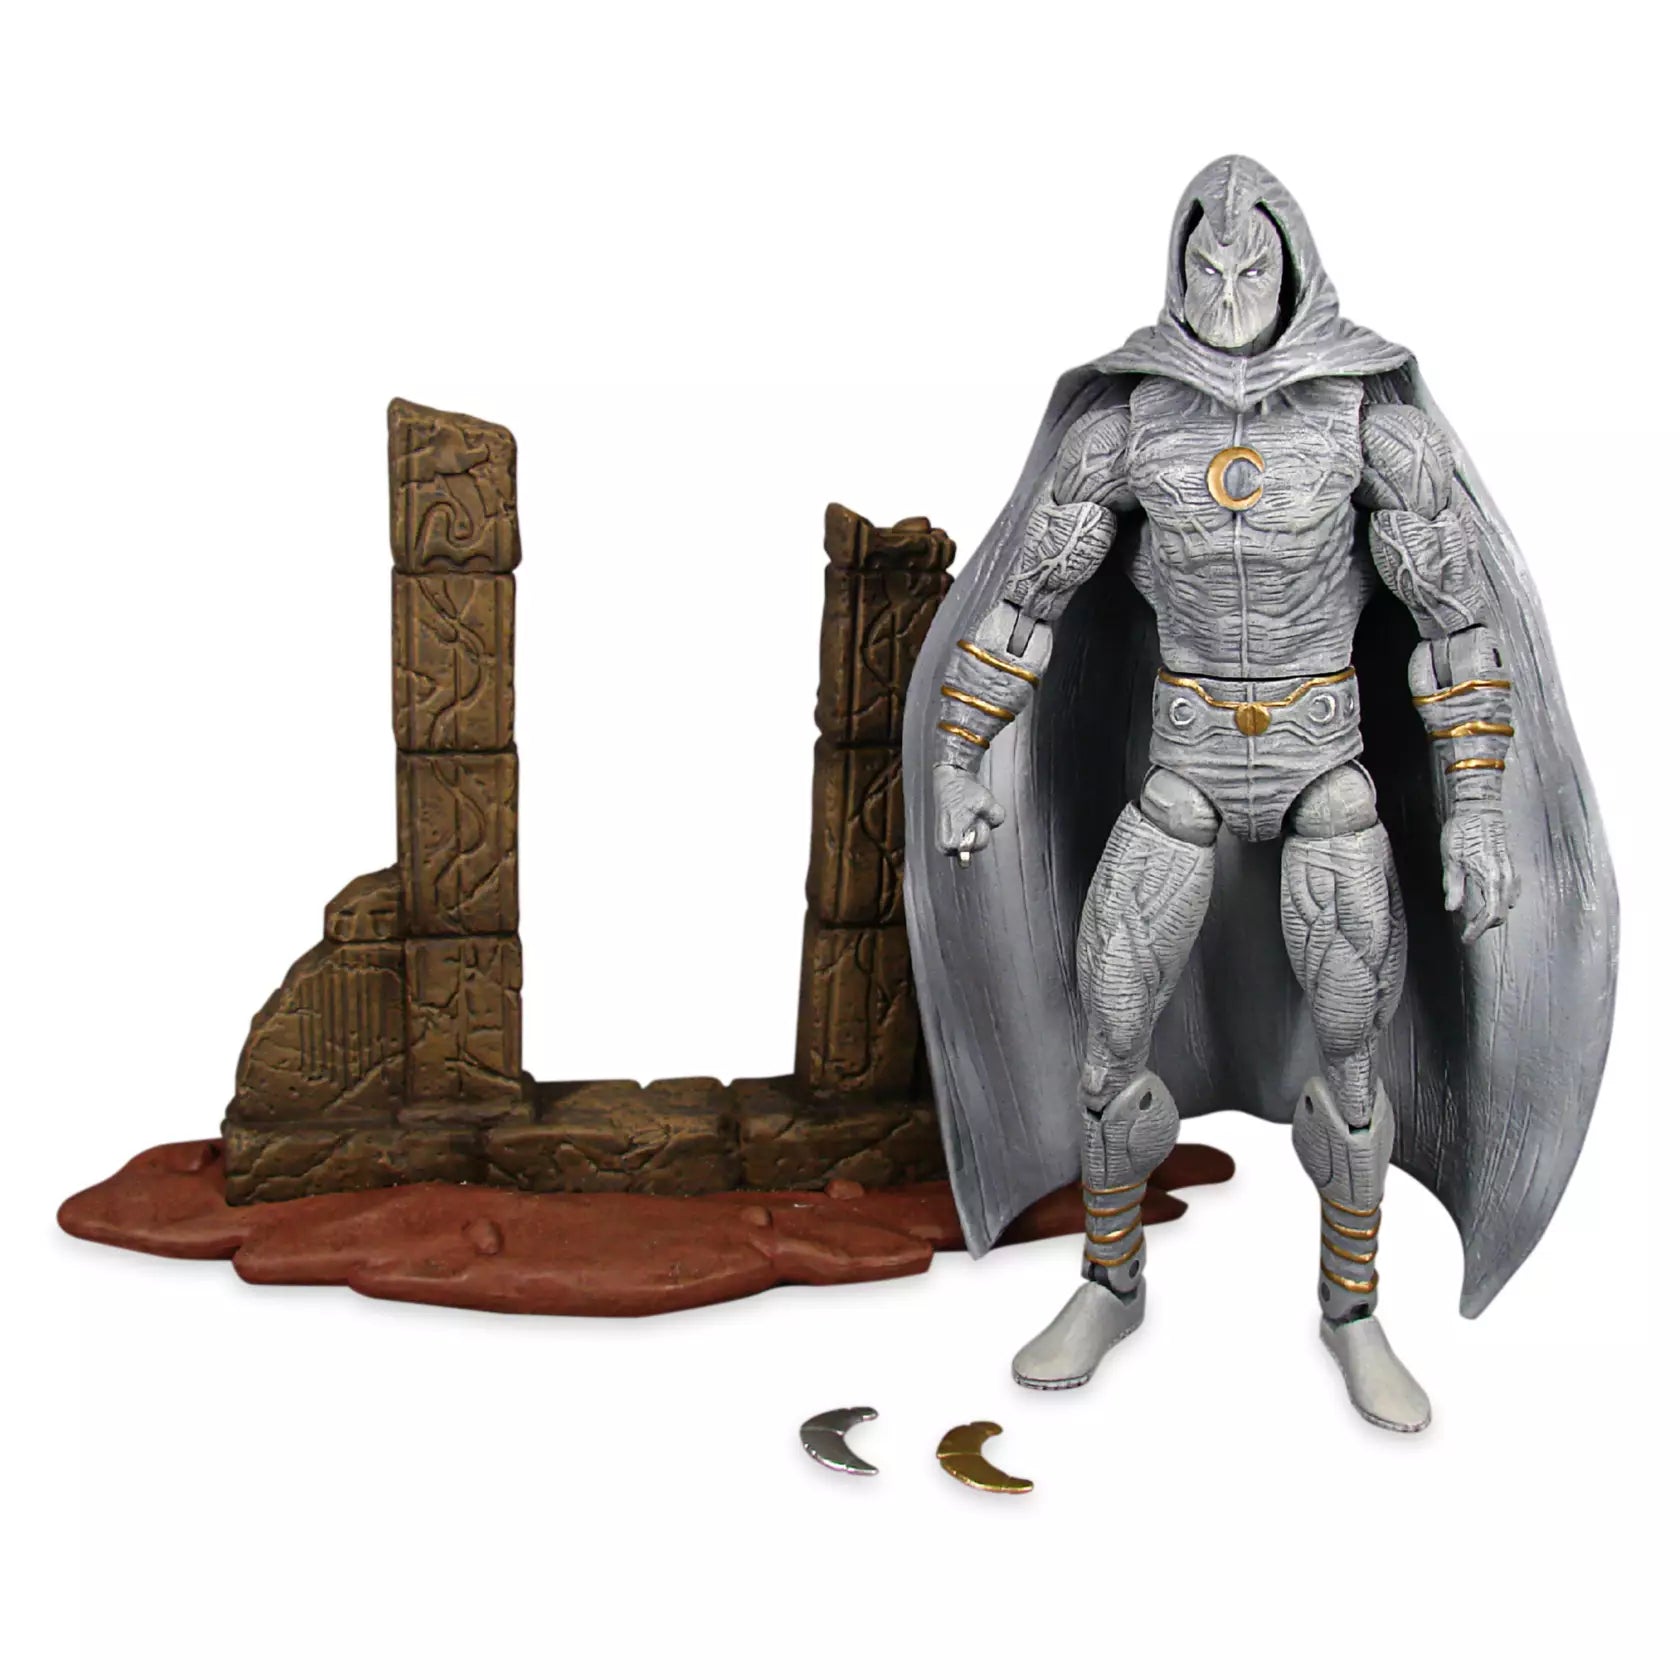 Moon Knight Action Figure – Marvel Select by Diamond ''7 Inches'' - BumbleToys - 5-7 Years, Action Battling, Boys, collectible, collectors, Figures, Heroes, Marvel, Moon Knight, OXE, Pre-Order